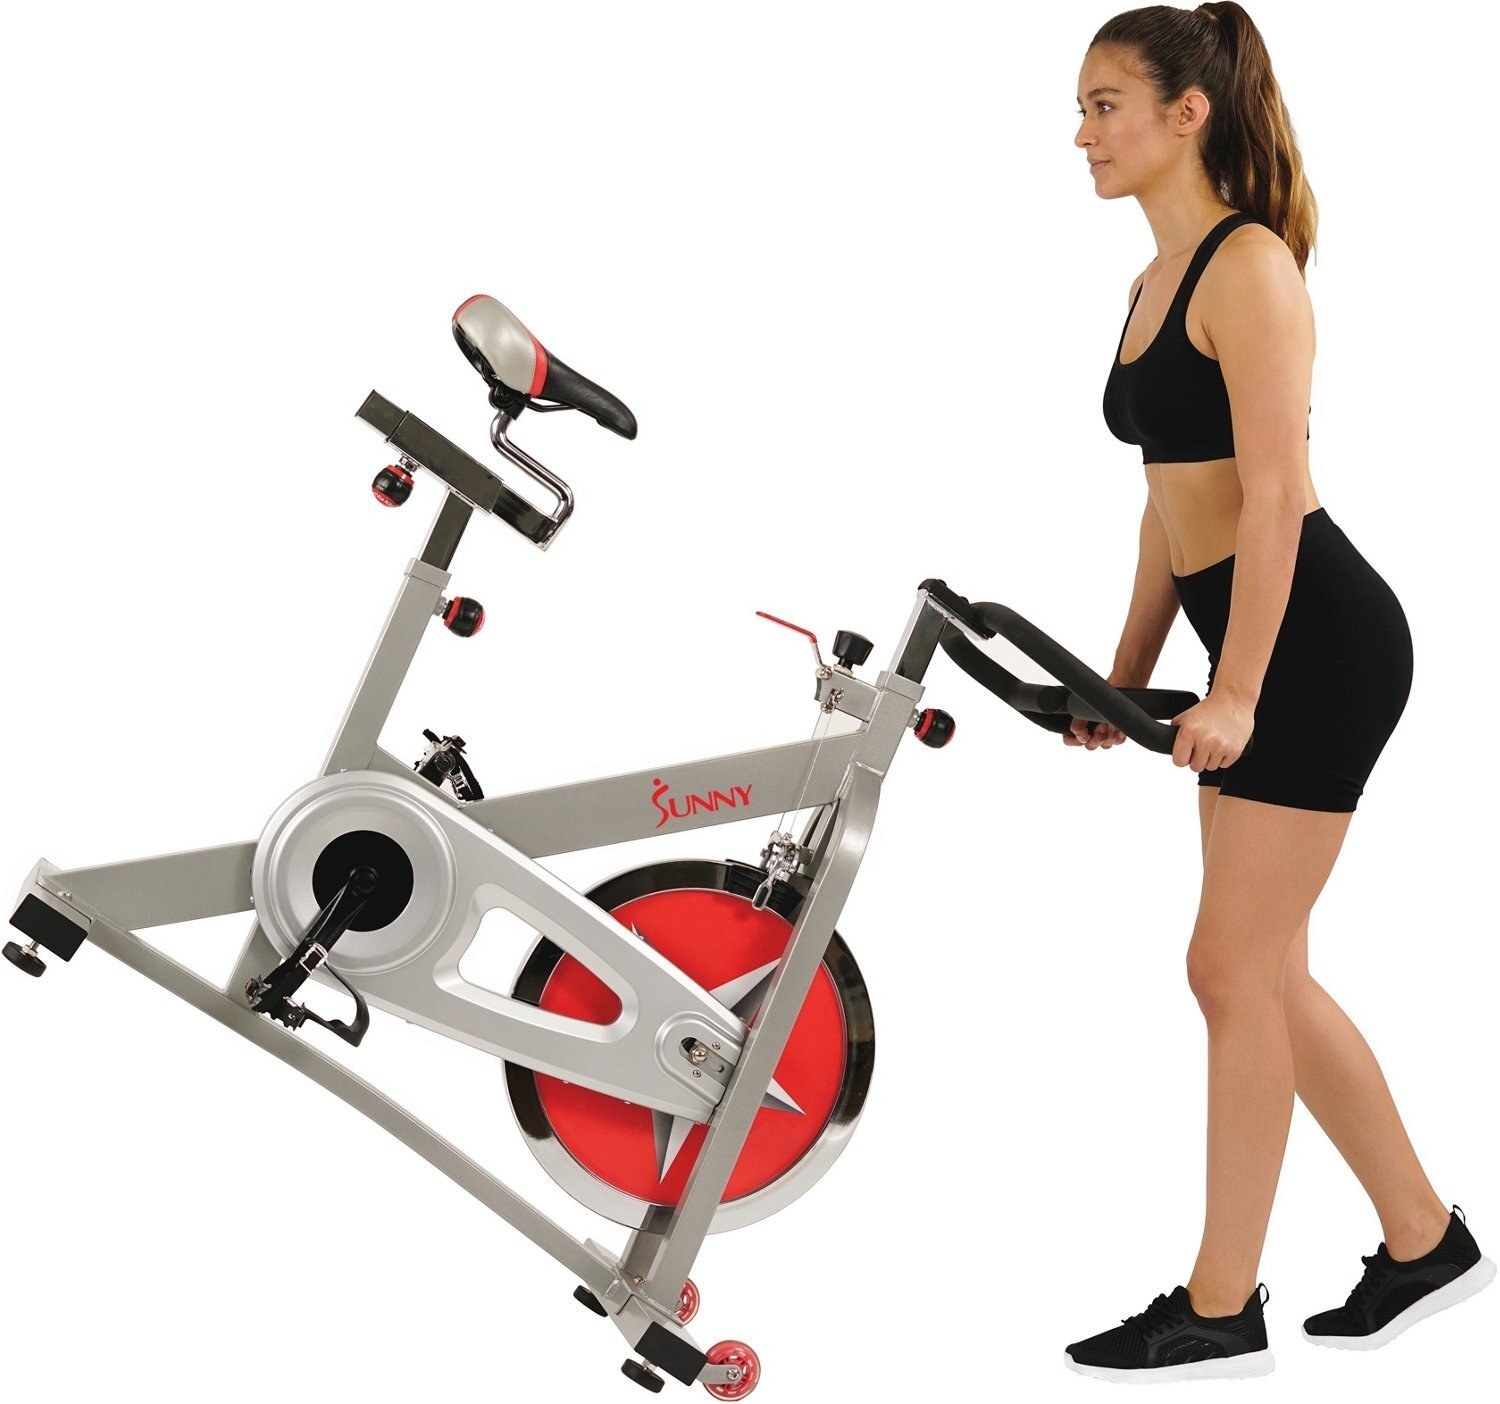 model using the small wheels on the standing bike to move it somewhere else